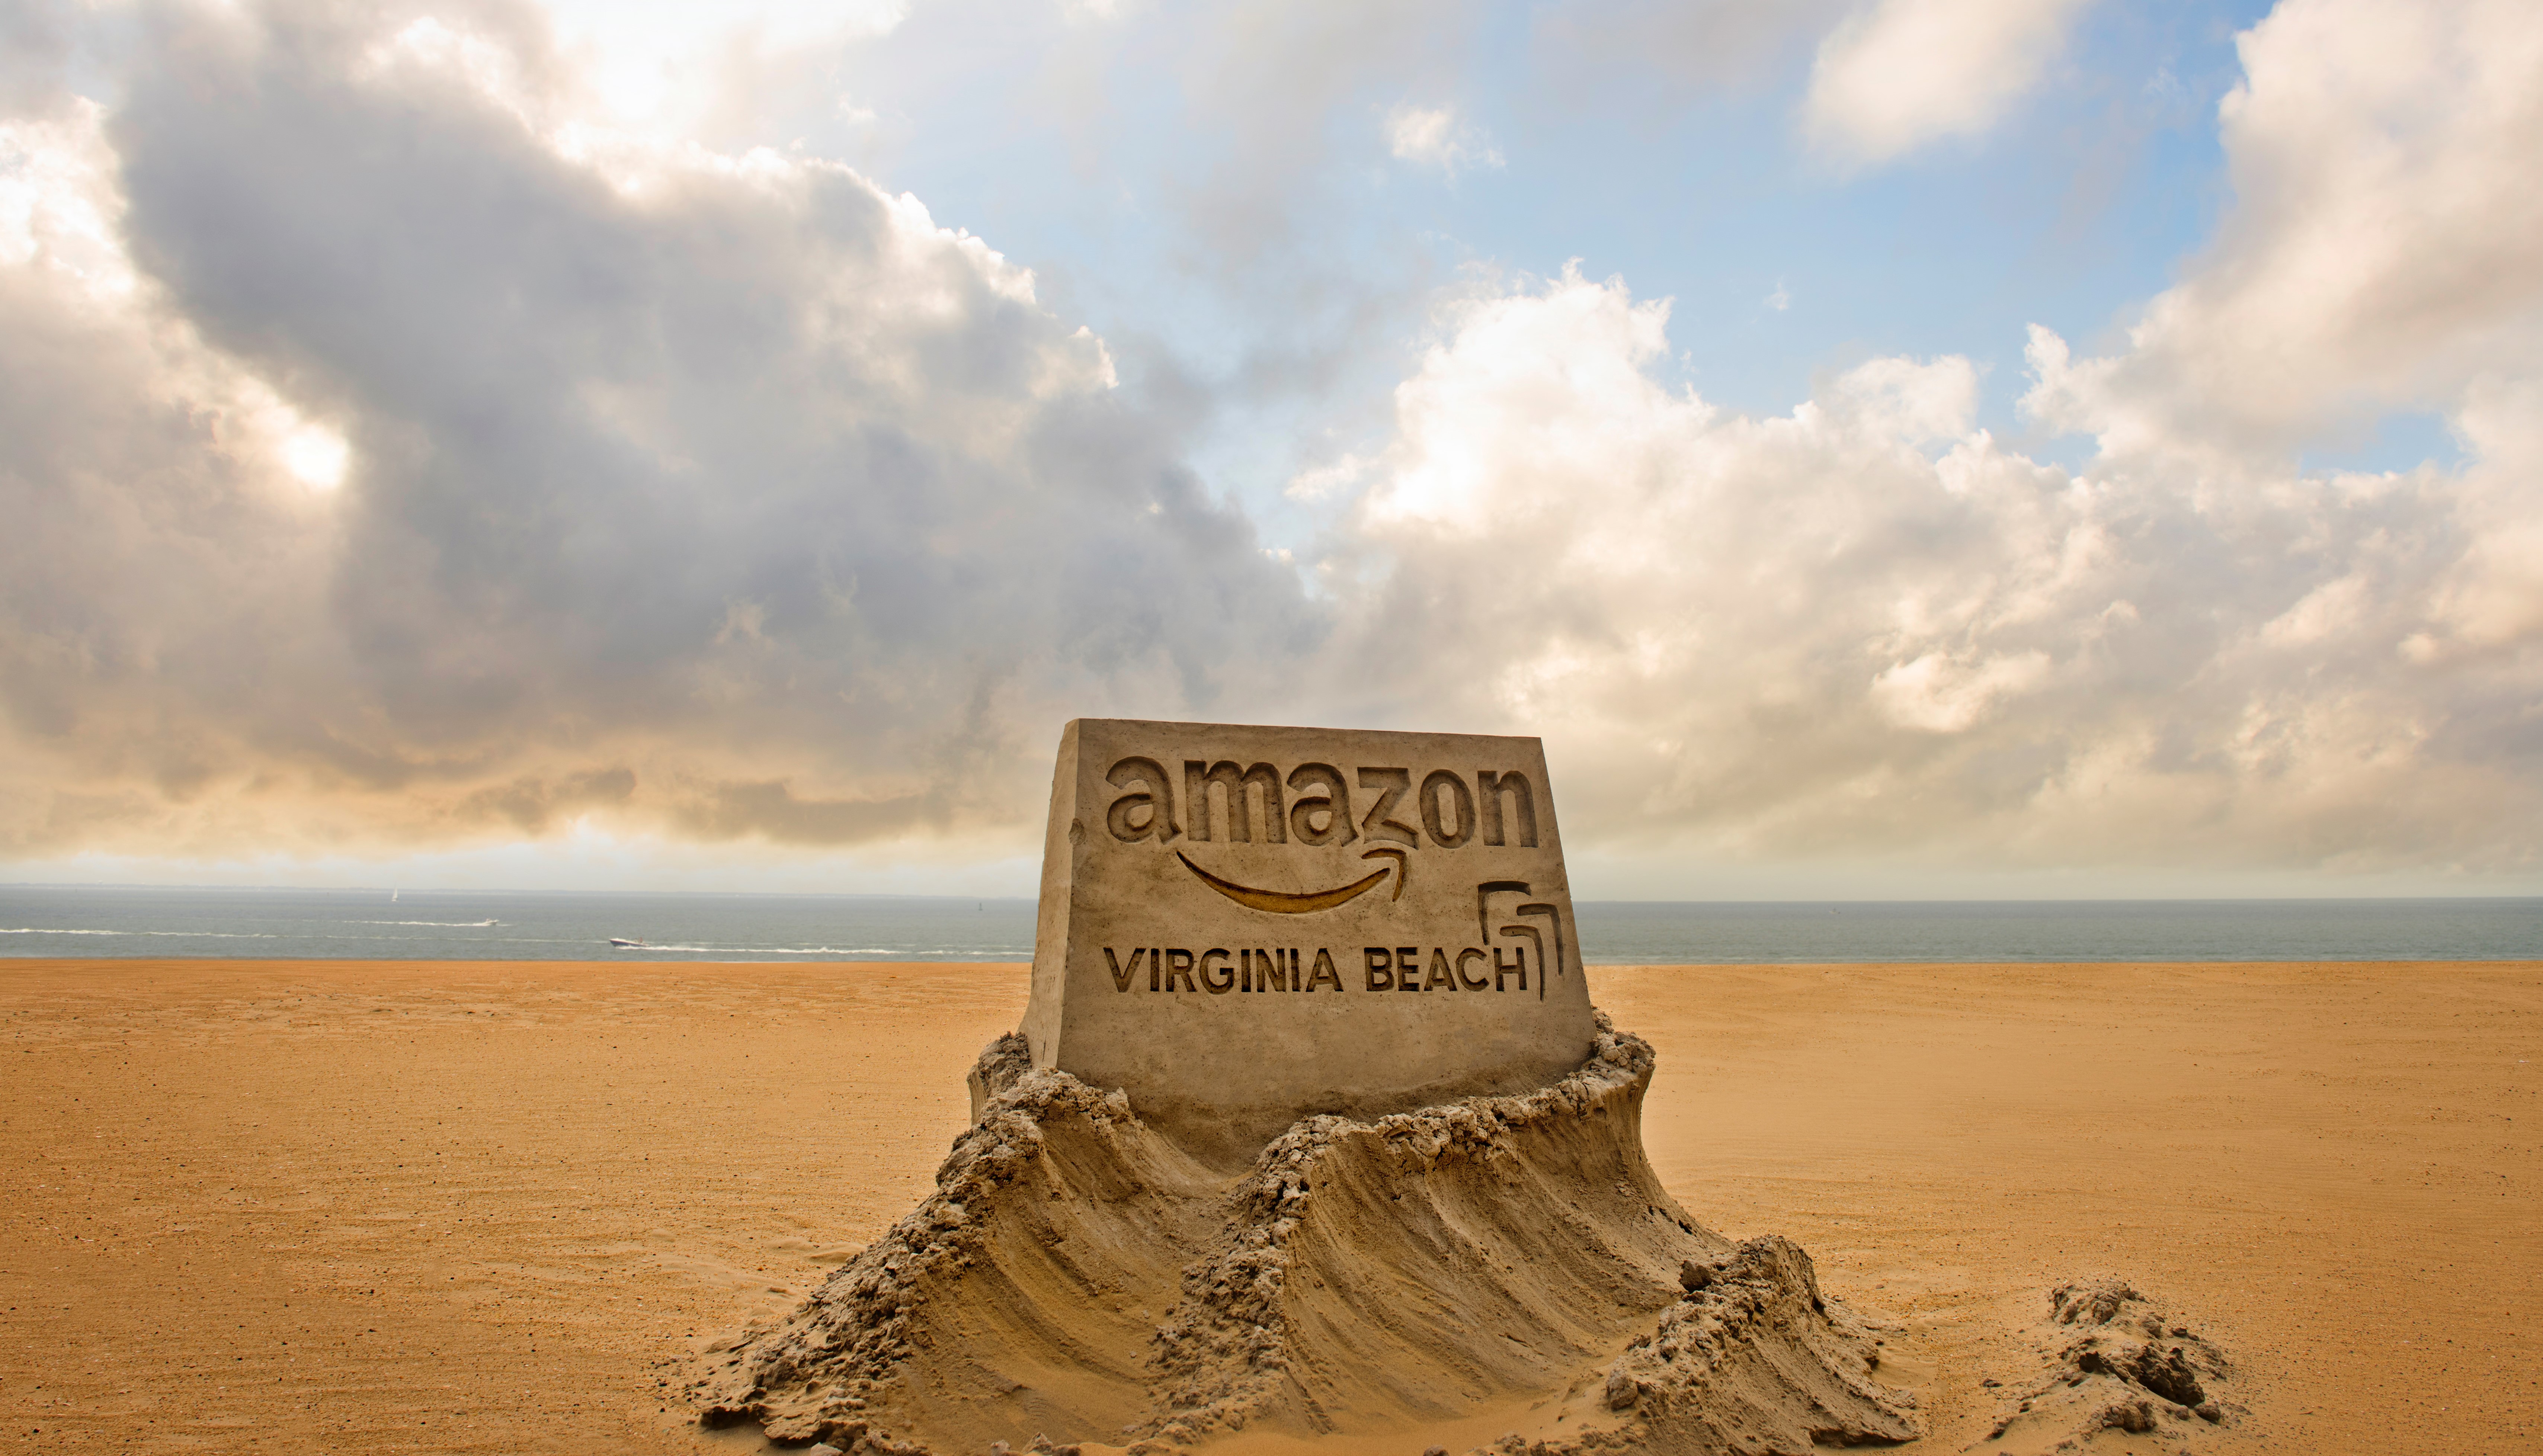 The costs of chasing Amazon in Va. Beach